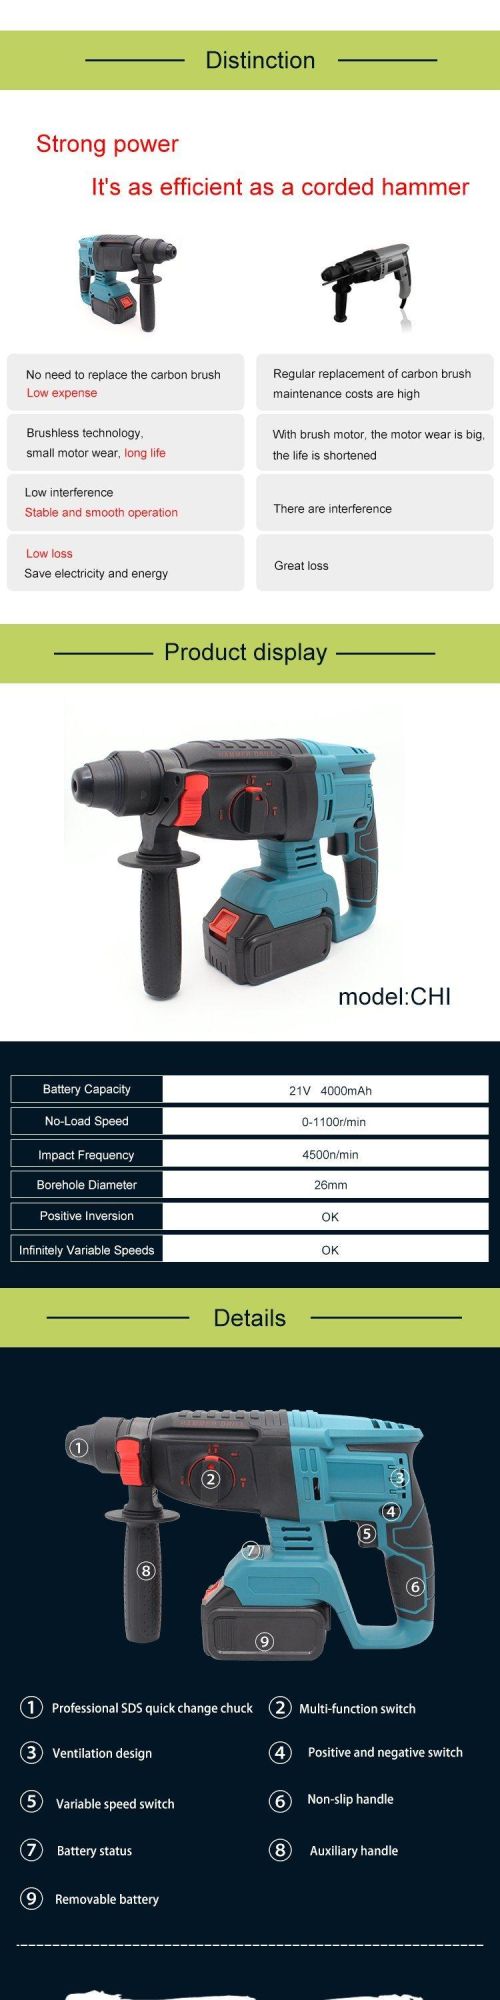 Gaide 18 V 20 24 Volt Rotary Jack Hammer Drill Machine Electric Cordless Hammer Drill Set for 26mm Concrete